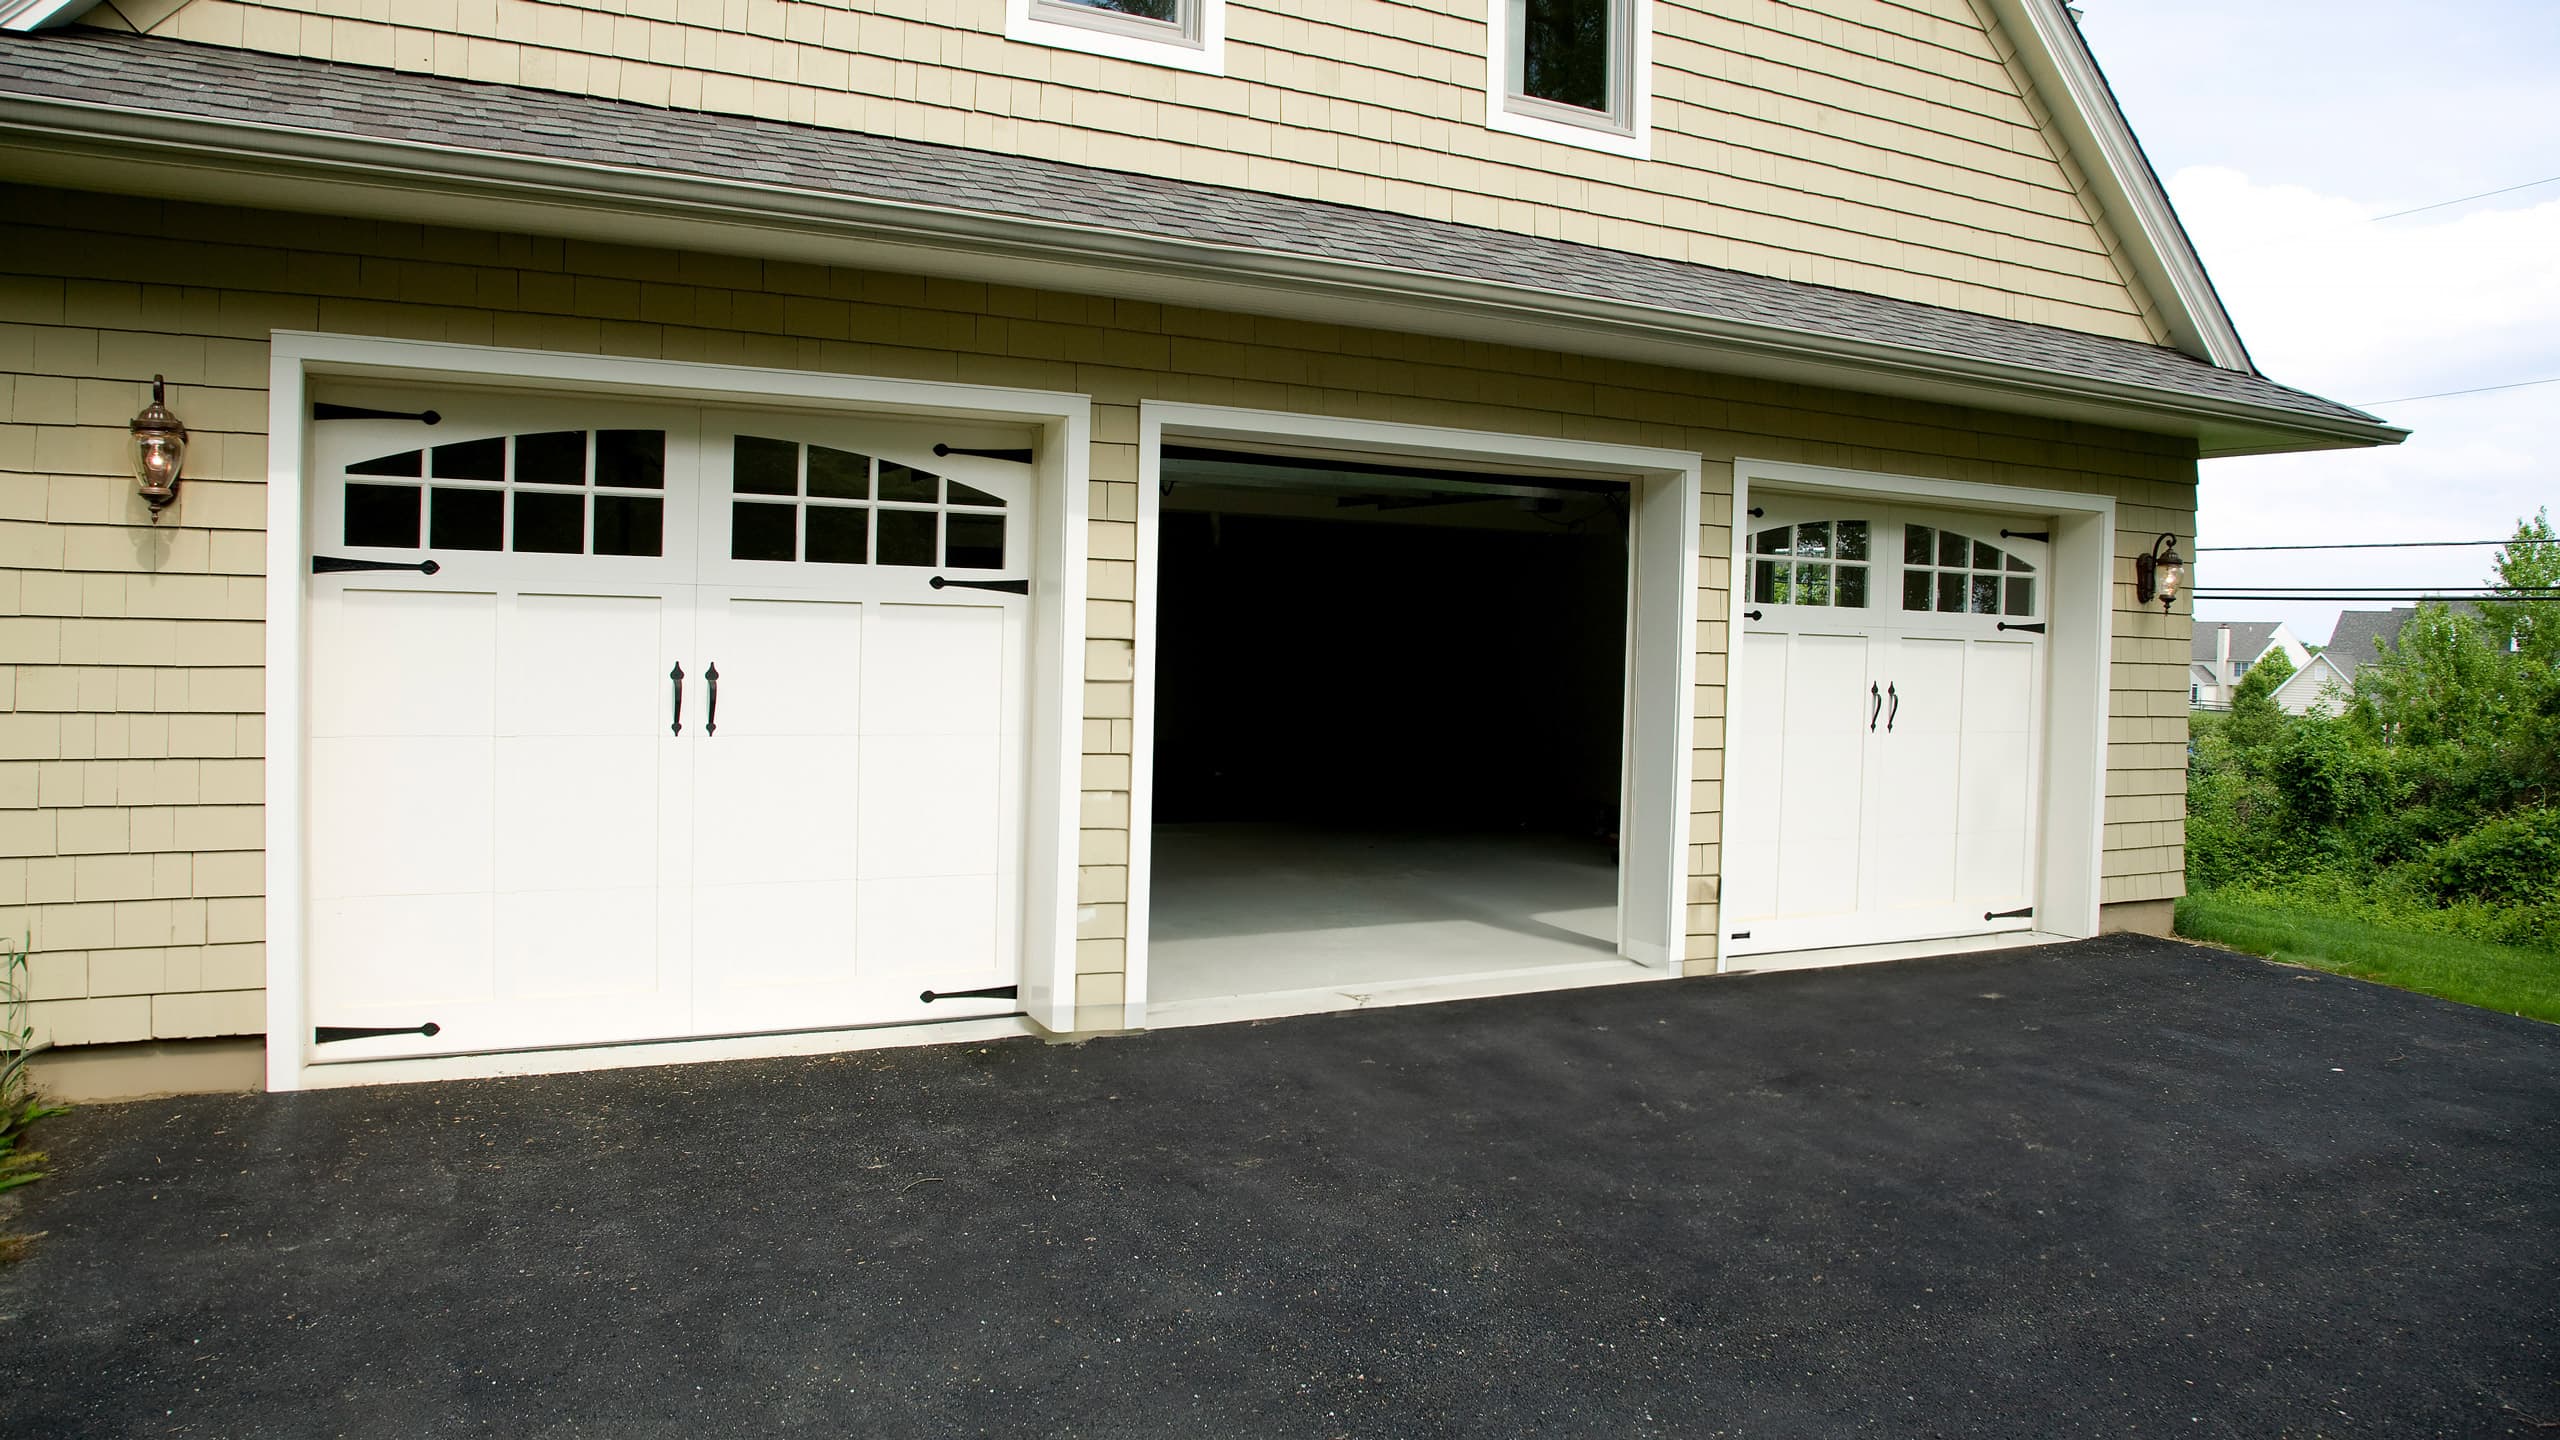 A tan suburban home with three white single car carriage house garage doors, middle door opened